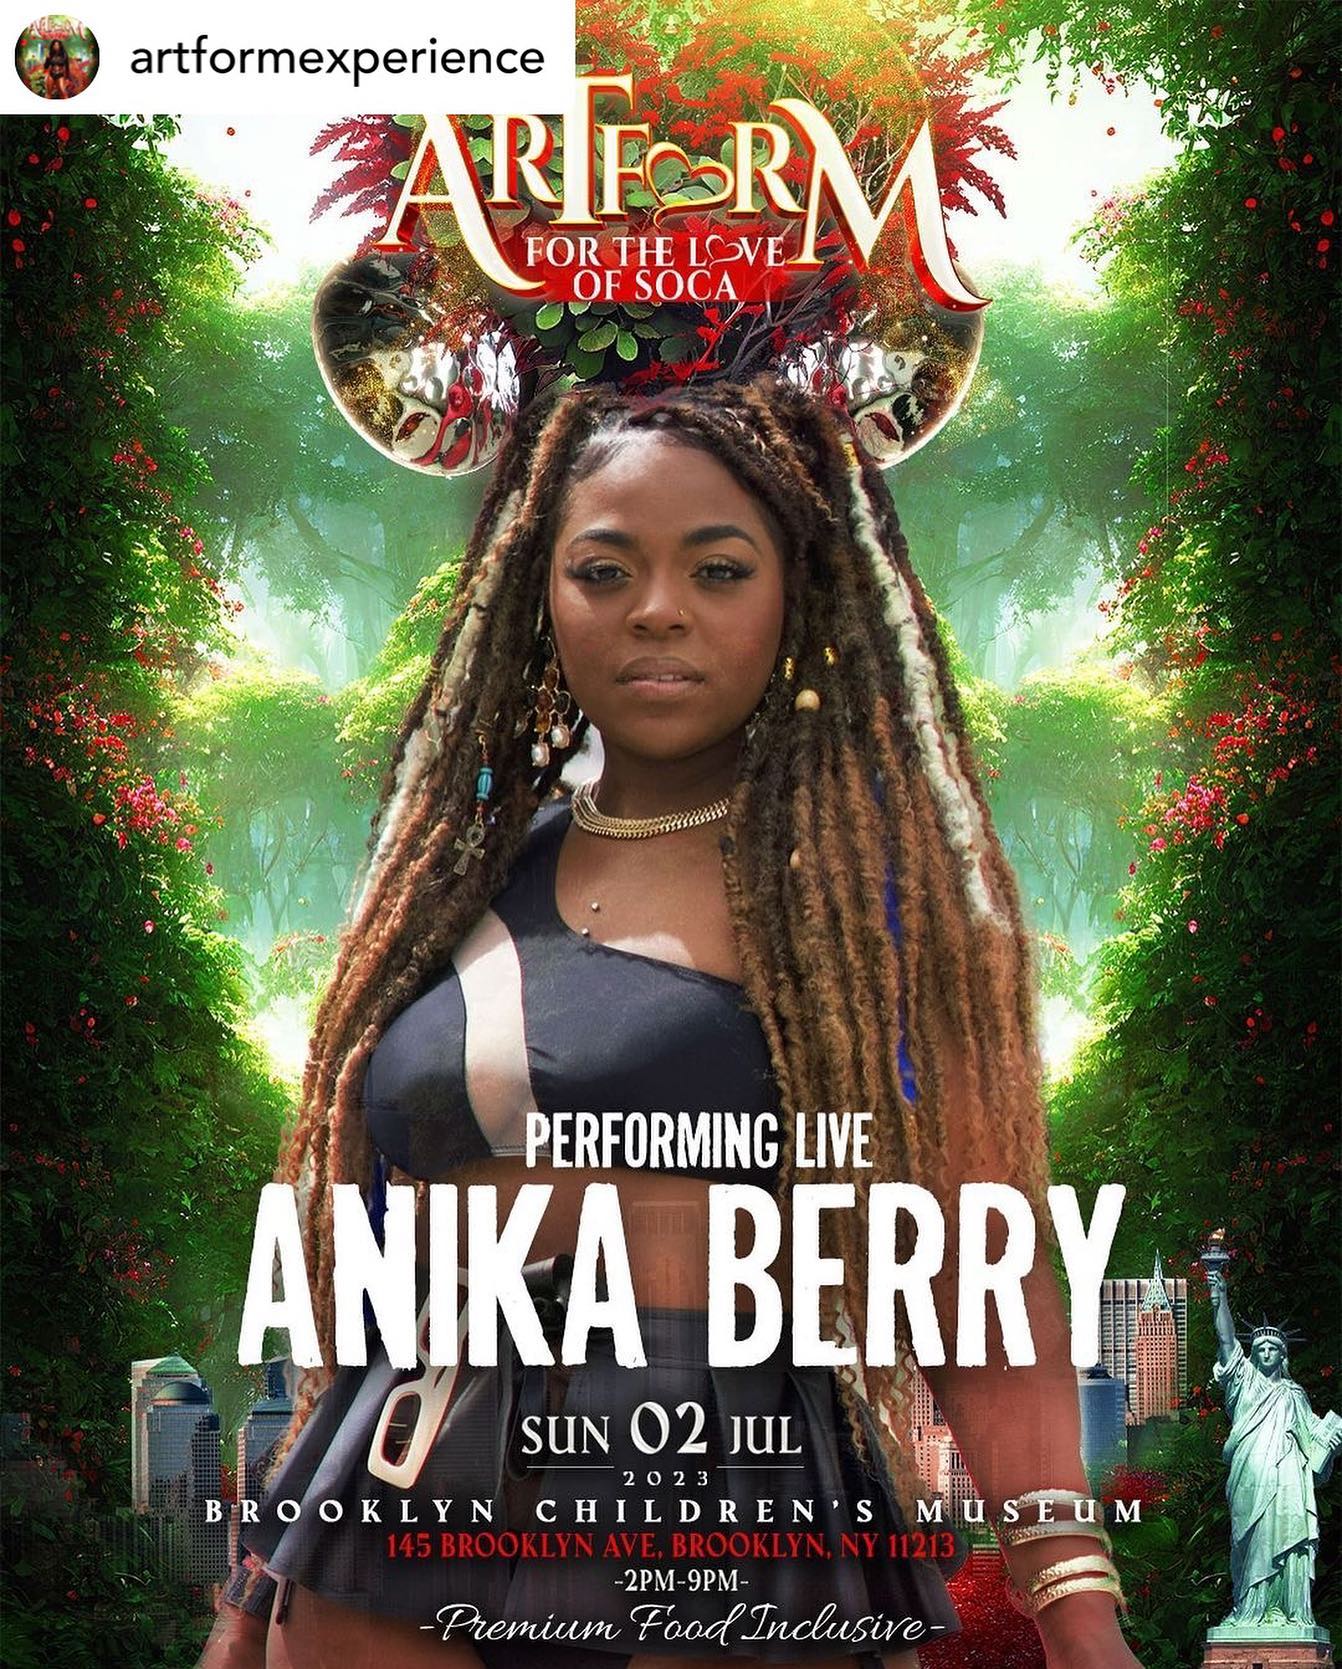 • Young, Talented & Beautiful upcoming superstar @anikaberry_ will be at ARTFORM.

NADIA BATSON IN CONCERT
🥁 Full Band
🏽 Dancers
 Performances By: Destra, Farmer Nappy, Adam O, Ronnie McIntosh, SuperBlue, Anika Berry and more 

🗓️ Sunday July 2nd 2023 
 Brooklyn Childrens Museum 
145 Brooklyn Ave, Brooklyn, NY 

️ 2pm - 9pm 
Showtime 6pm 

~ PREMIUM FOOD INCLUSIVE ~

🎟️ TICKETS 
Click Link In Bio

Physical Tickets available @savannahspiced 

@artformexperience @nadiabatson @natslamming